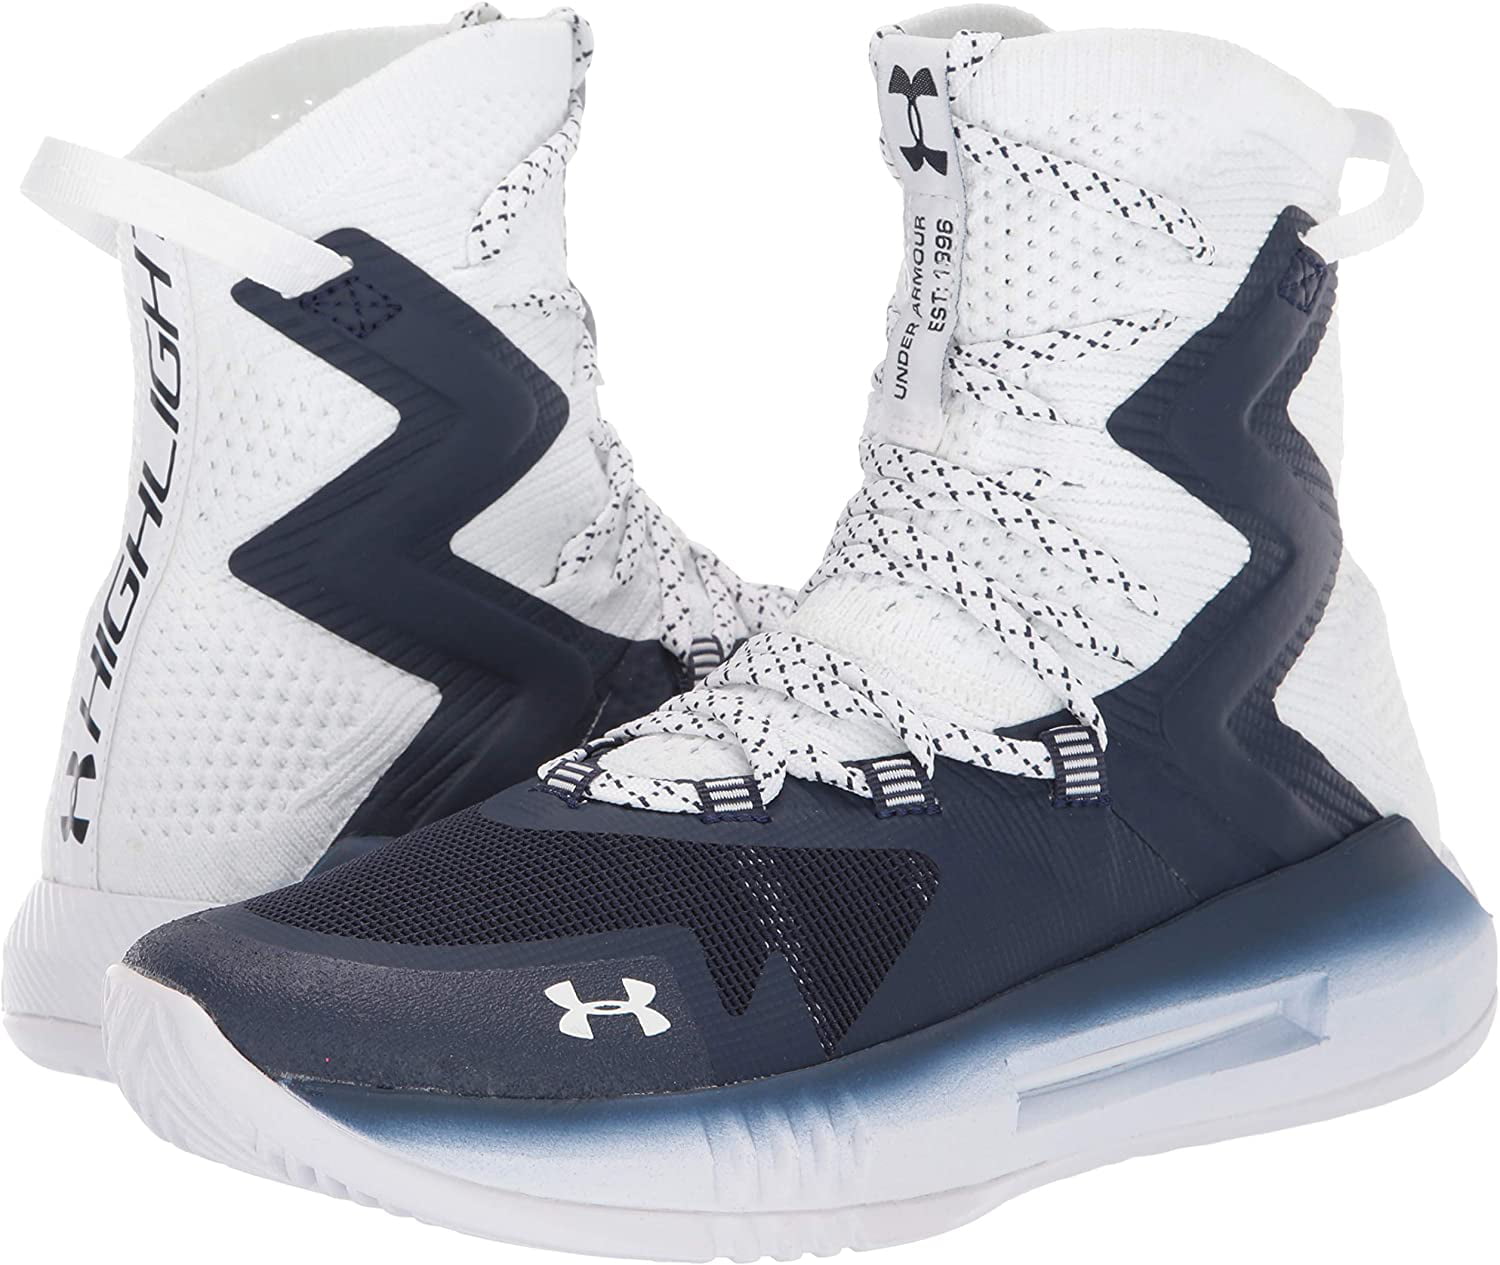 Under Armour Womens Highlight Ace 2.0 Volleyball Shoe 